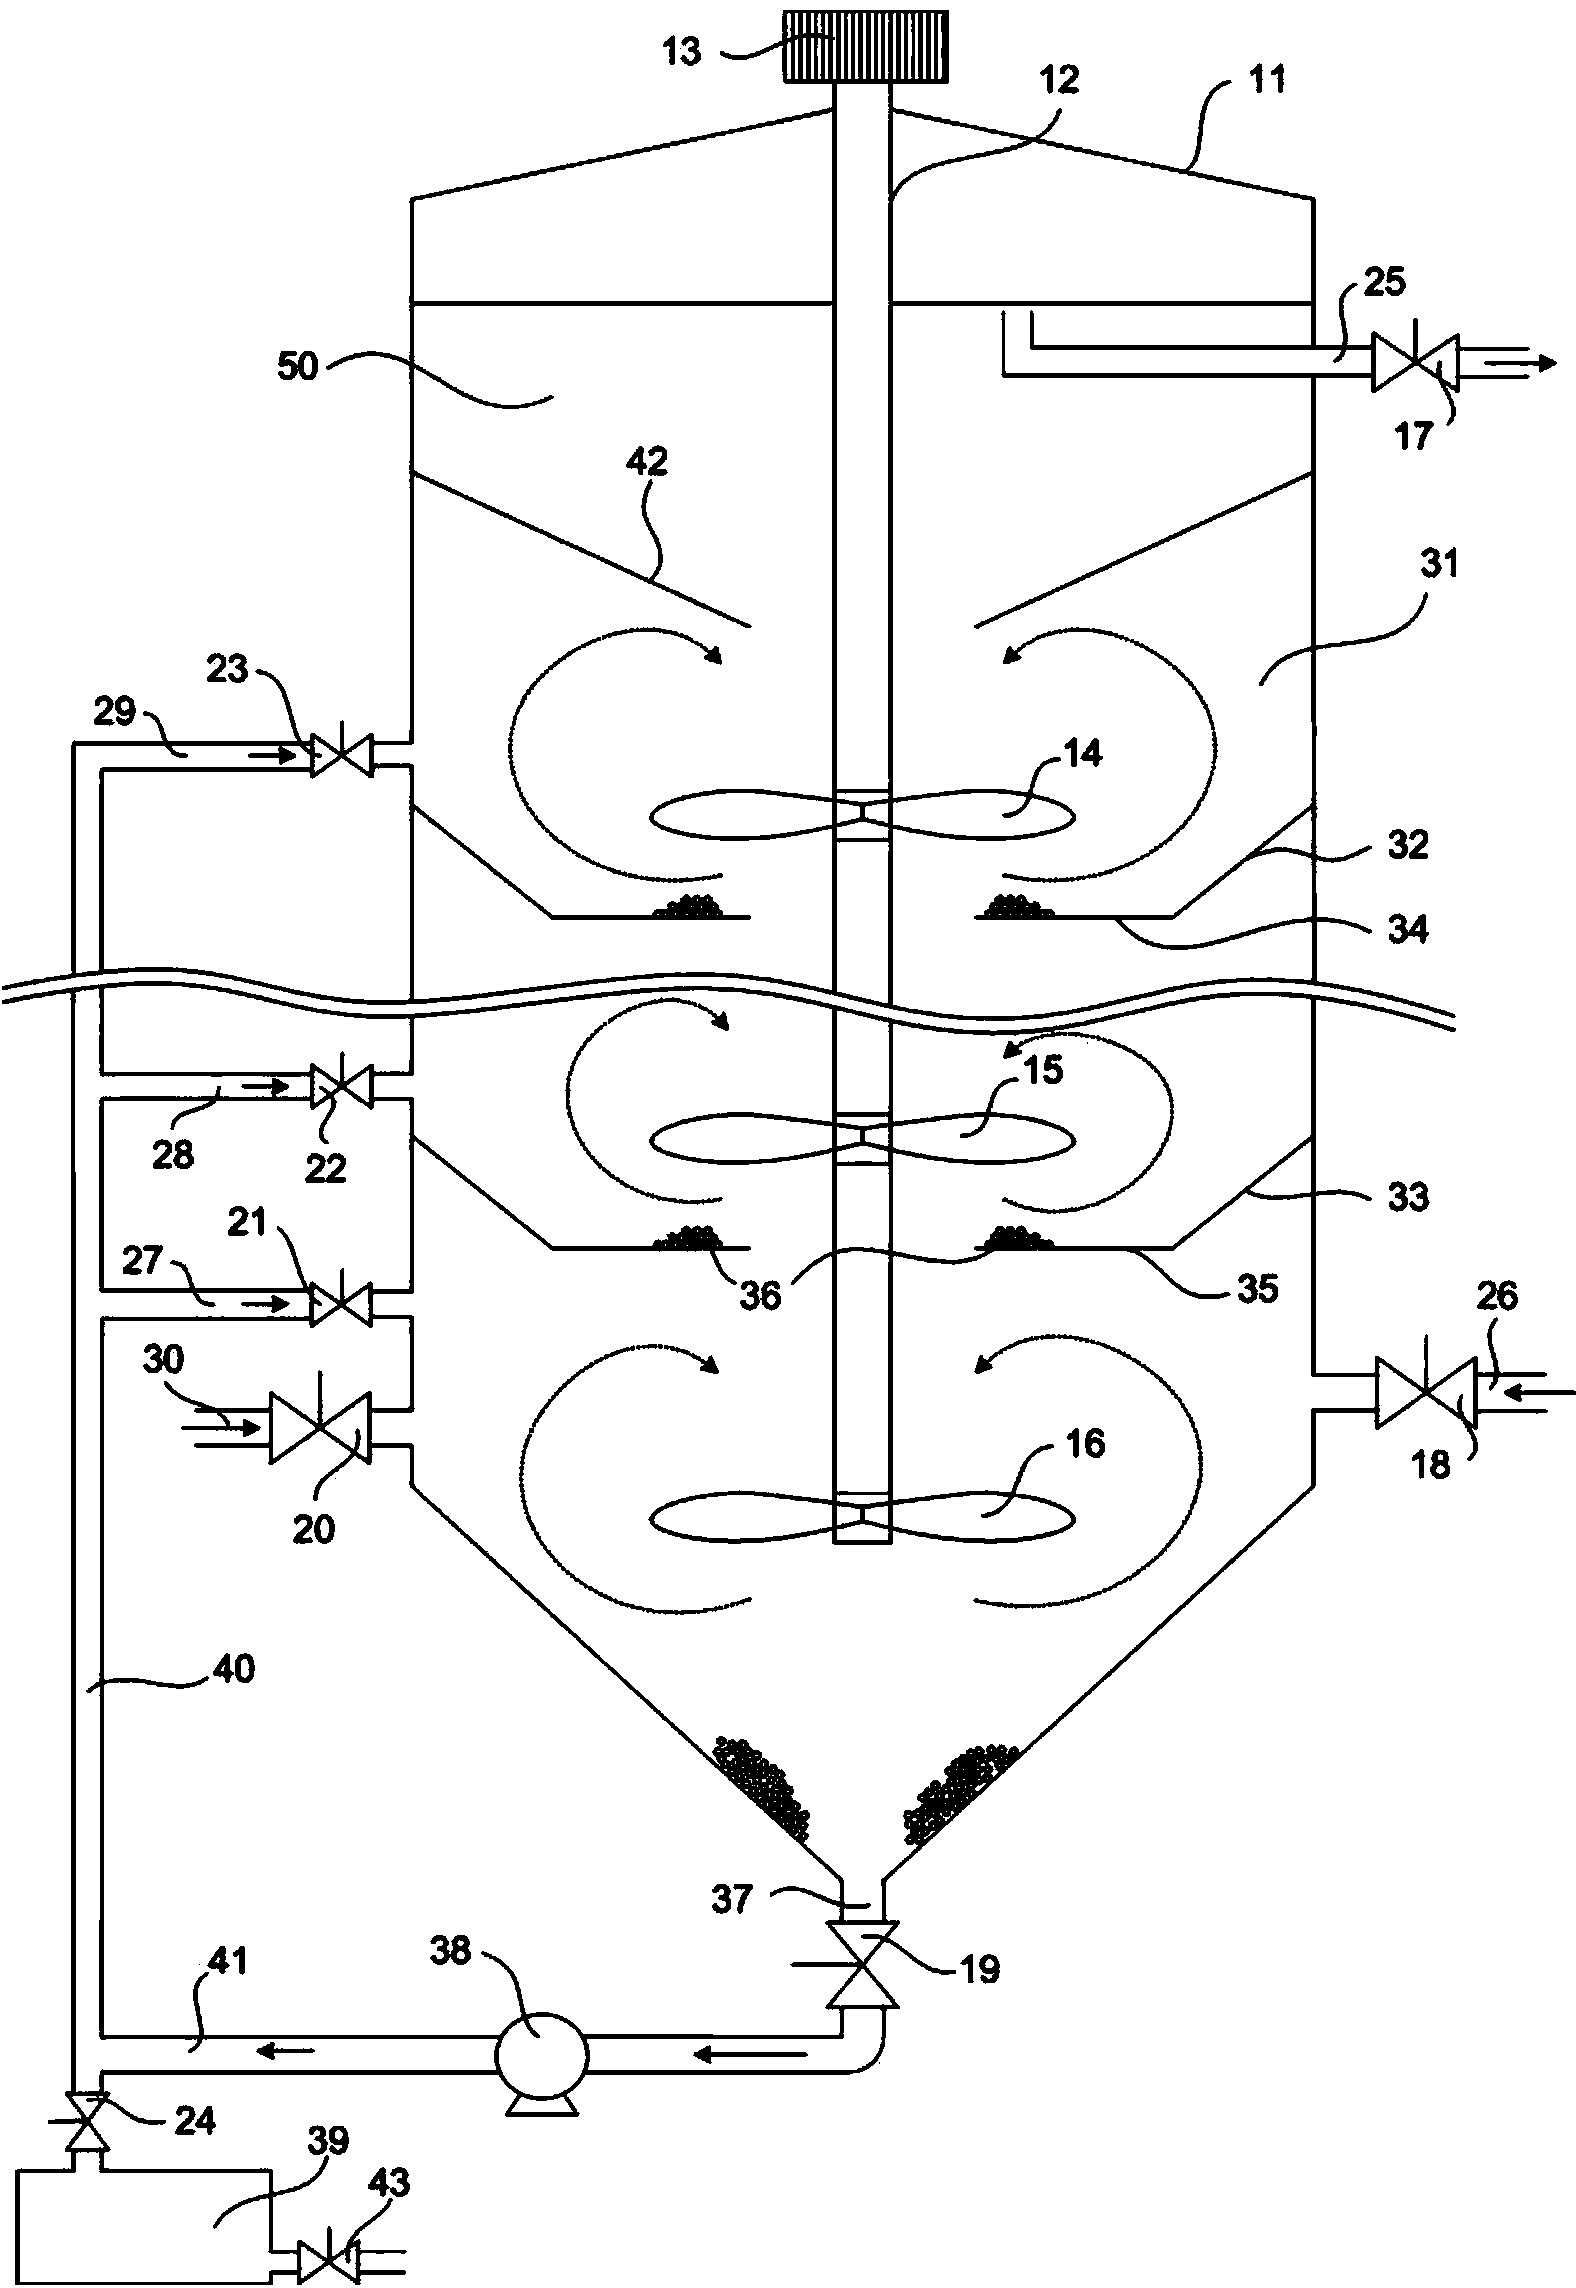 Crystallization reaction apparatus for recovering resources